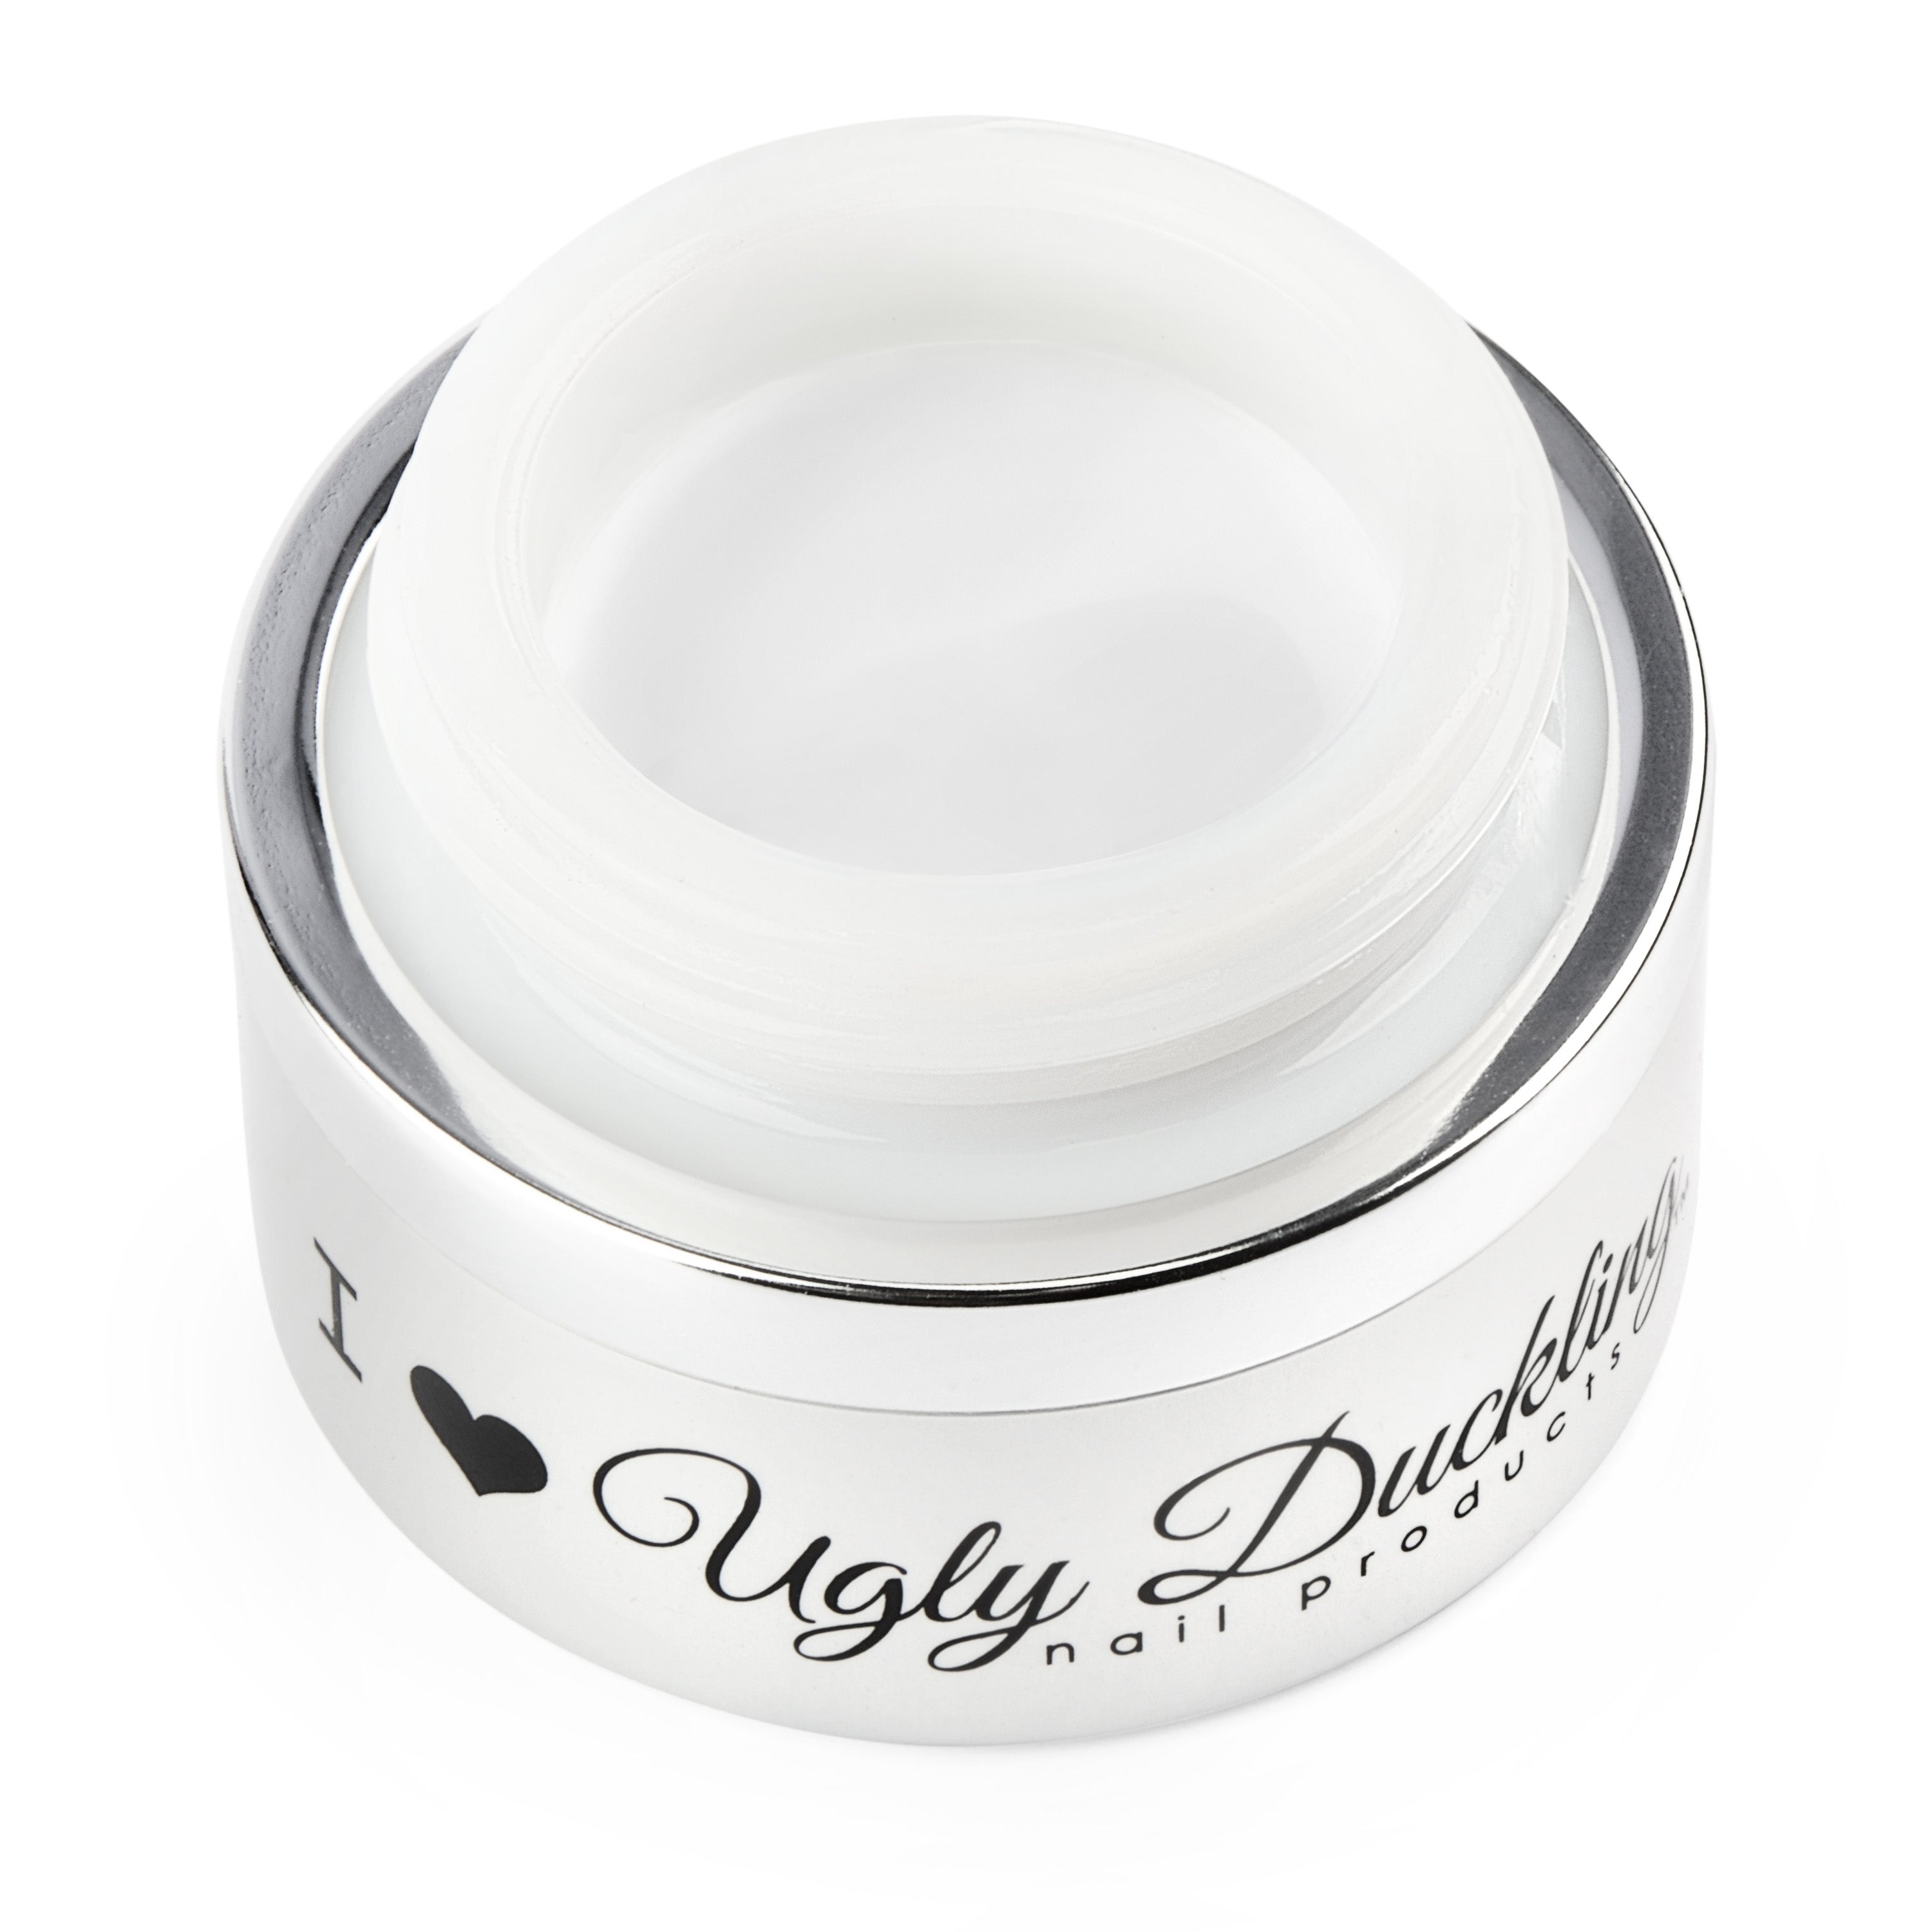 Ugly Duckling Sculpting Gel - Extreme White